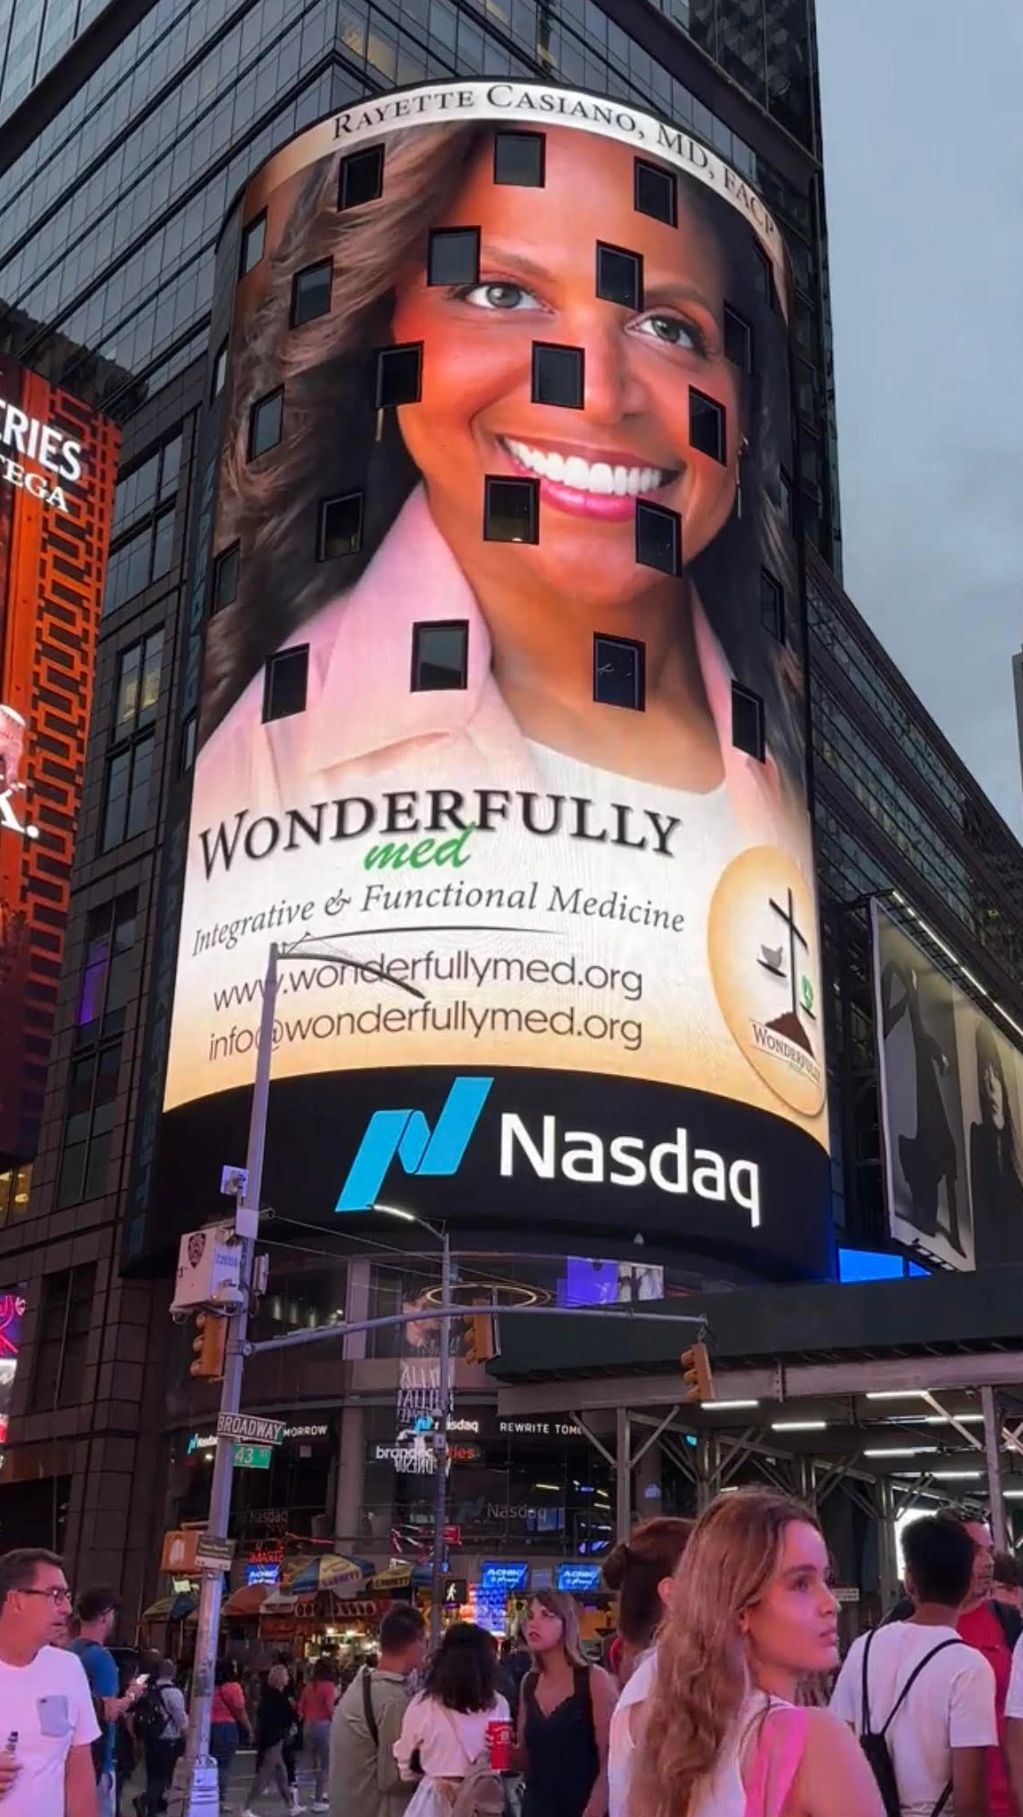 Rayette Casiano MD Hormone Replacement therapy, Functional Medicine doctor on Times Square billboard